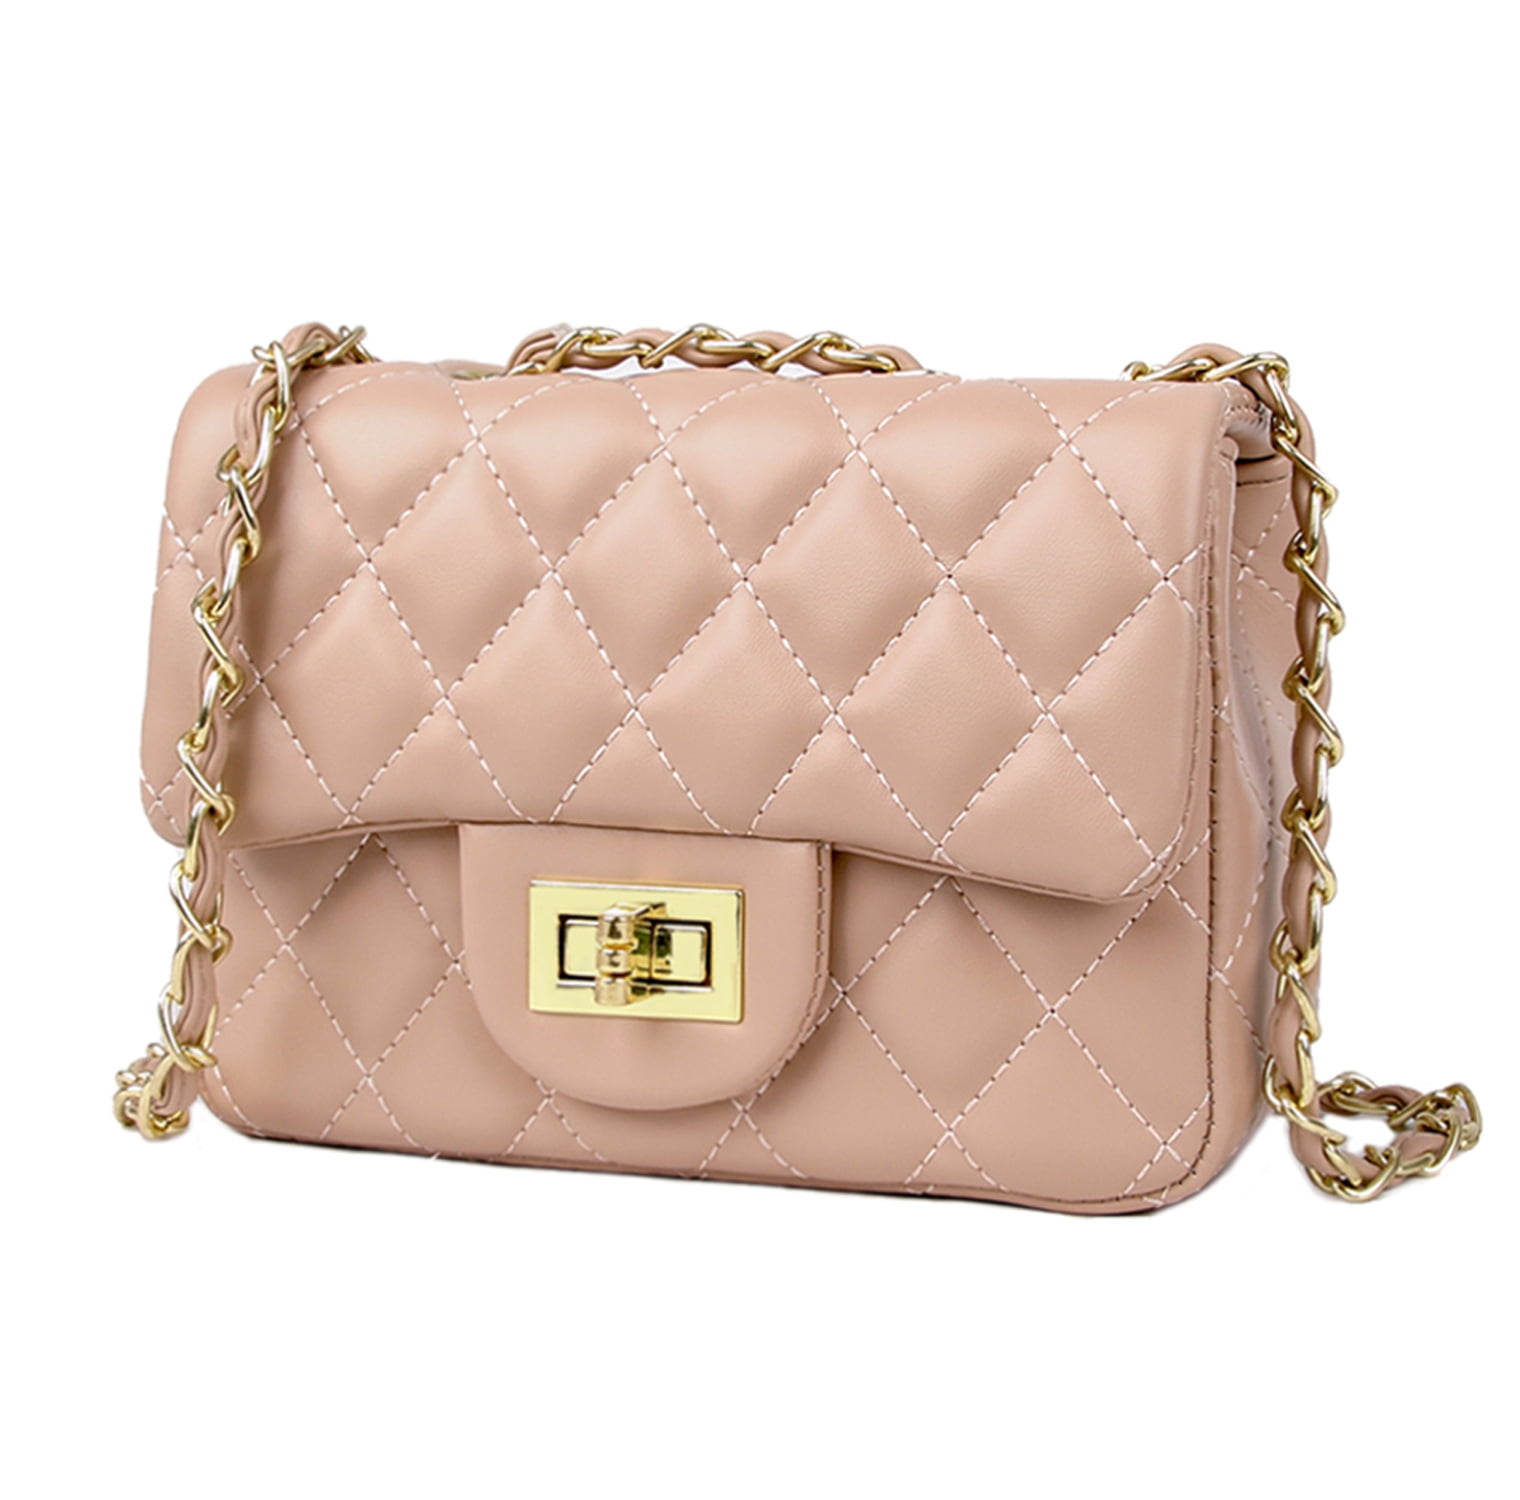 chanel tote bag small pink